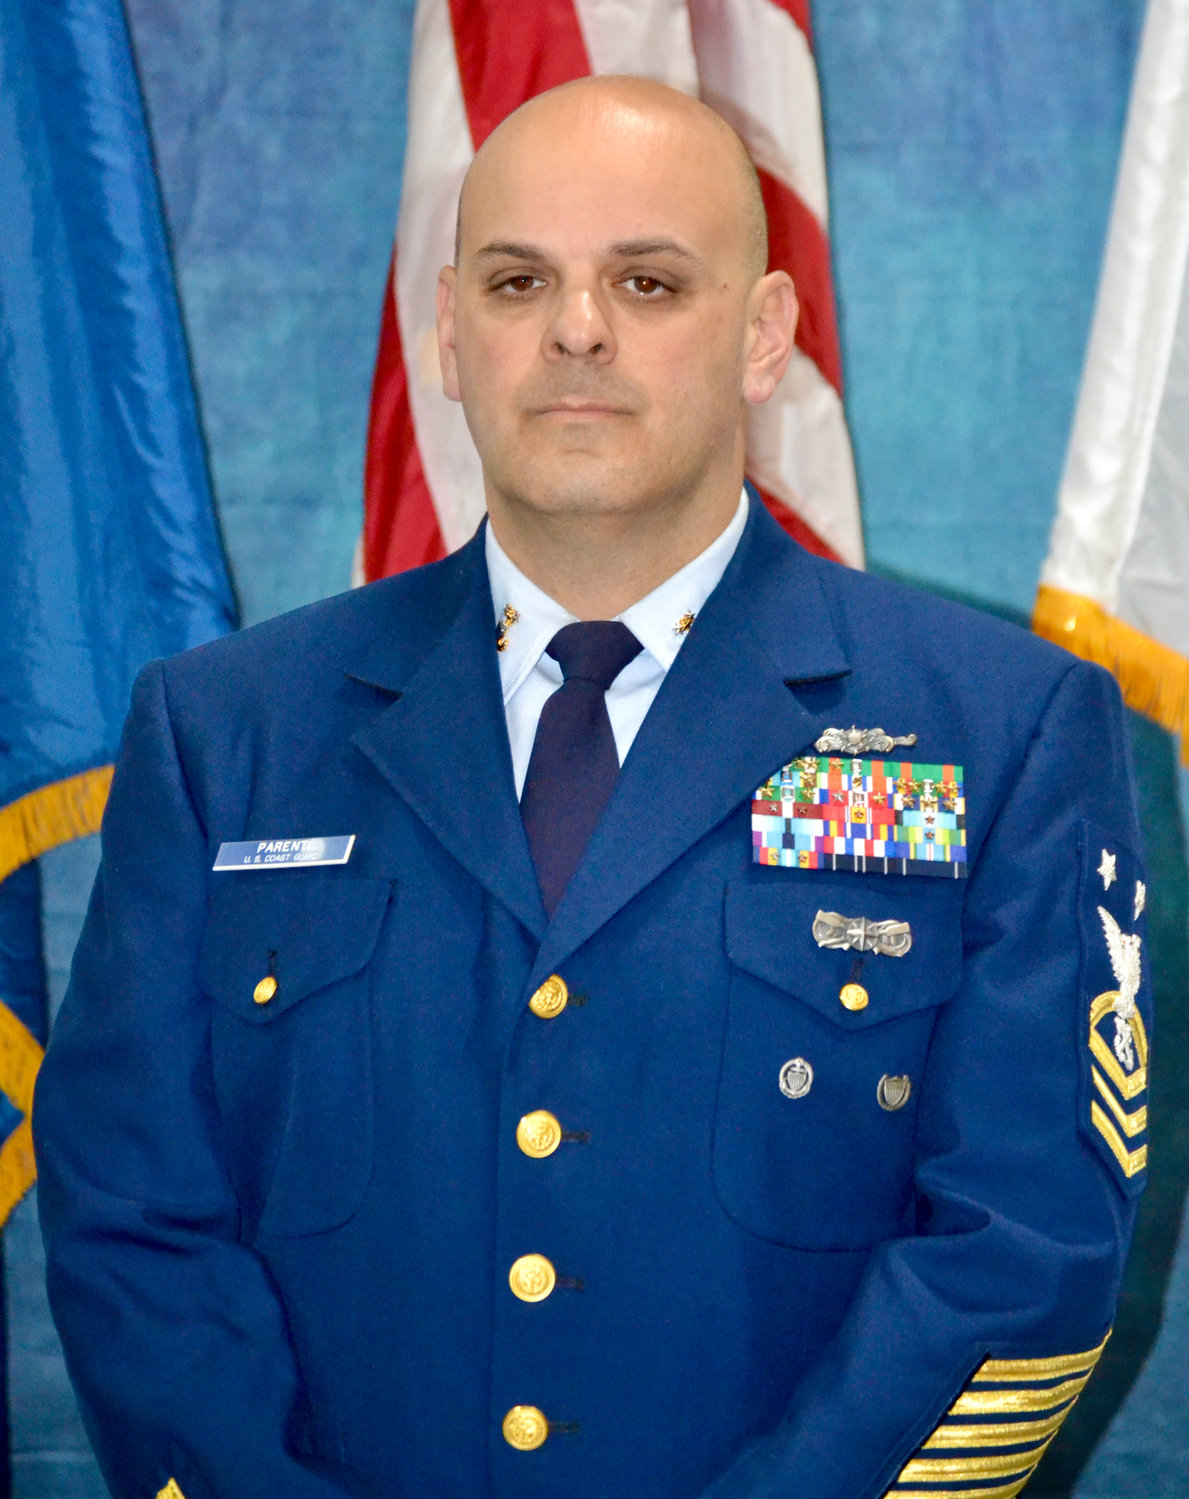 Master Chief Boatswain’s Mate Frank J. Parenti is set to retire from the United States Coast Guard on Oct. 1, 2022 having served for 27 years.